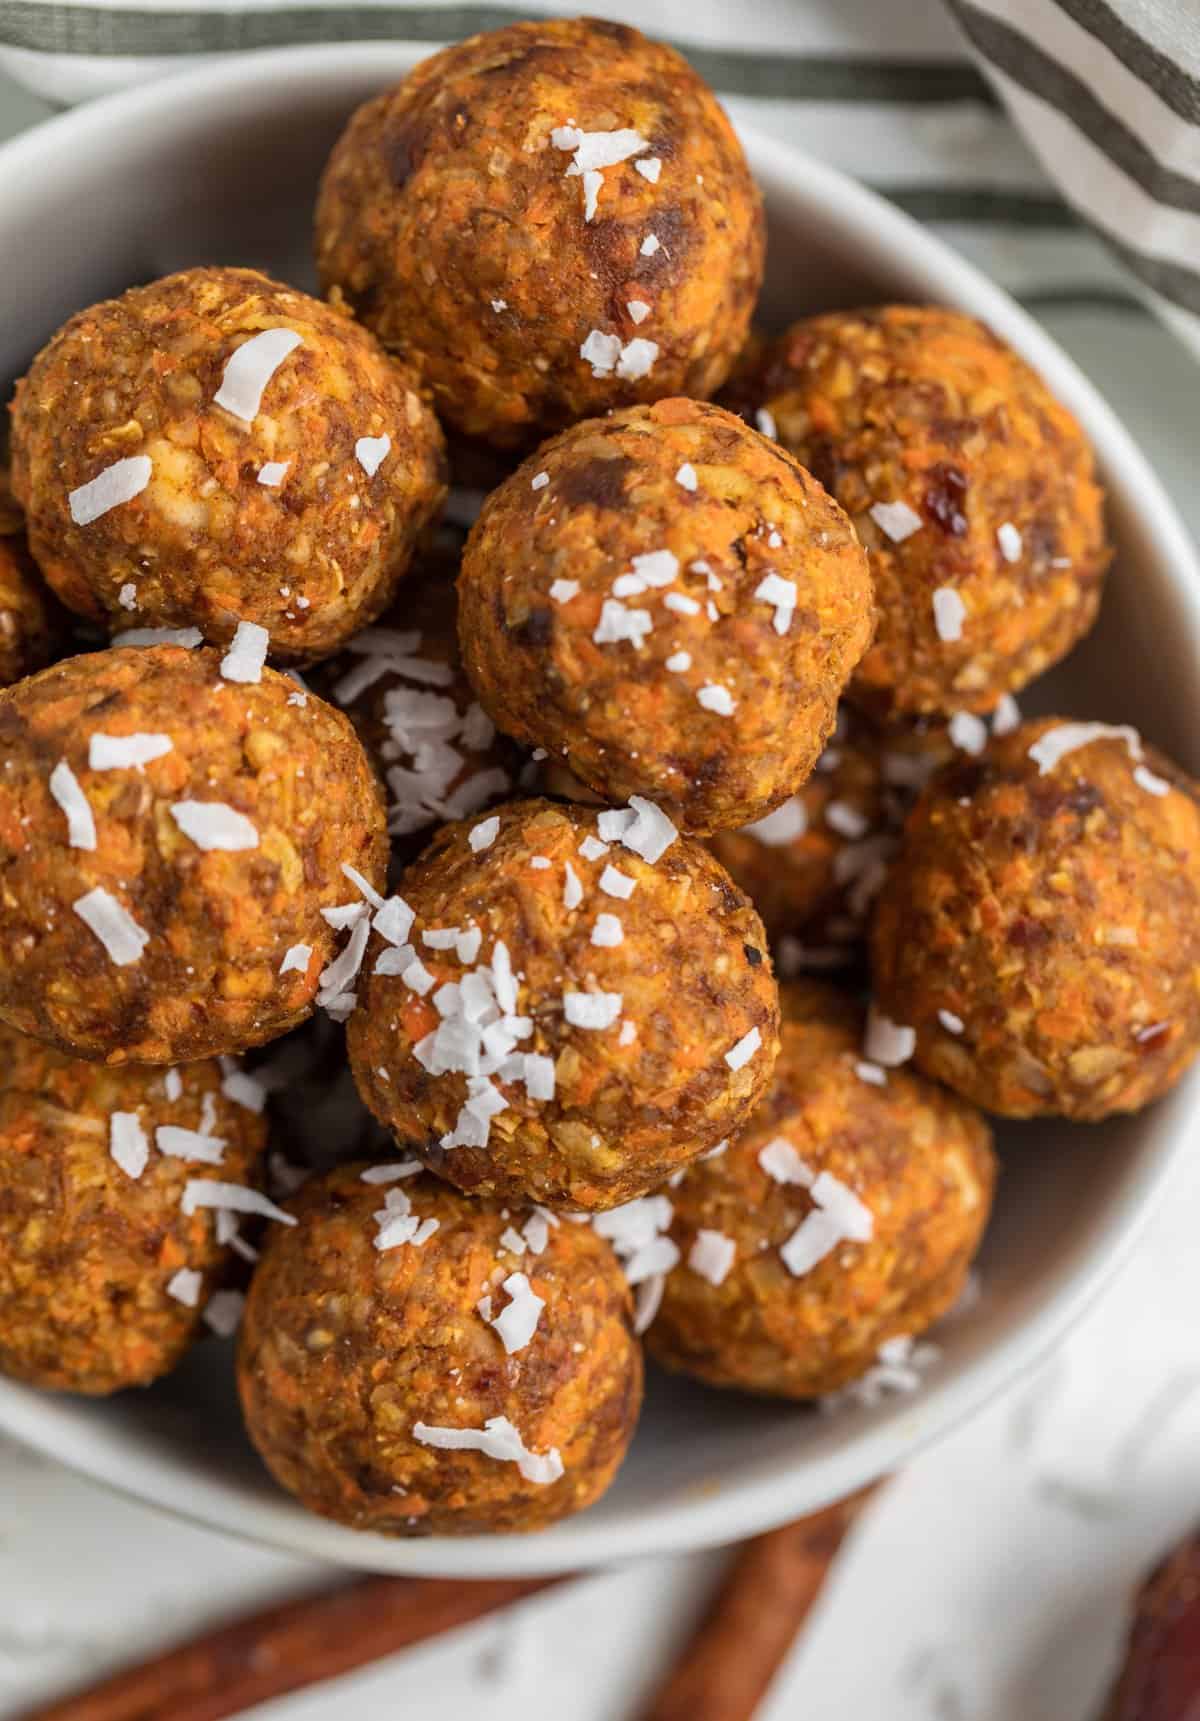 Bowl of carrot cake balls with shredded coconut on top.